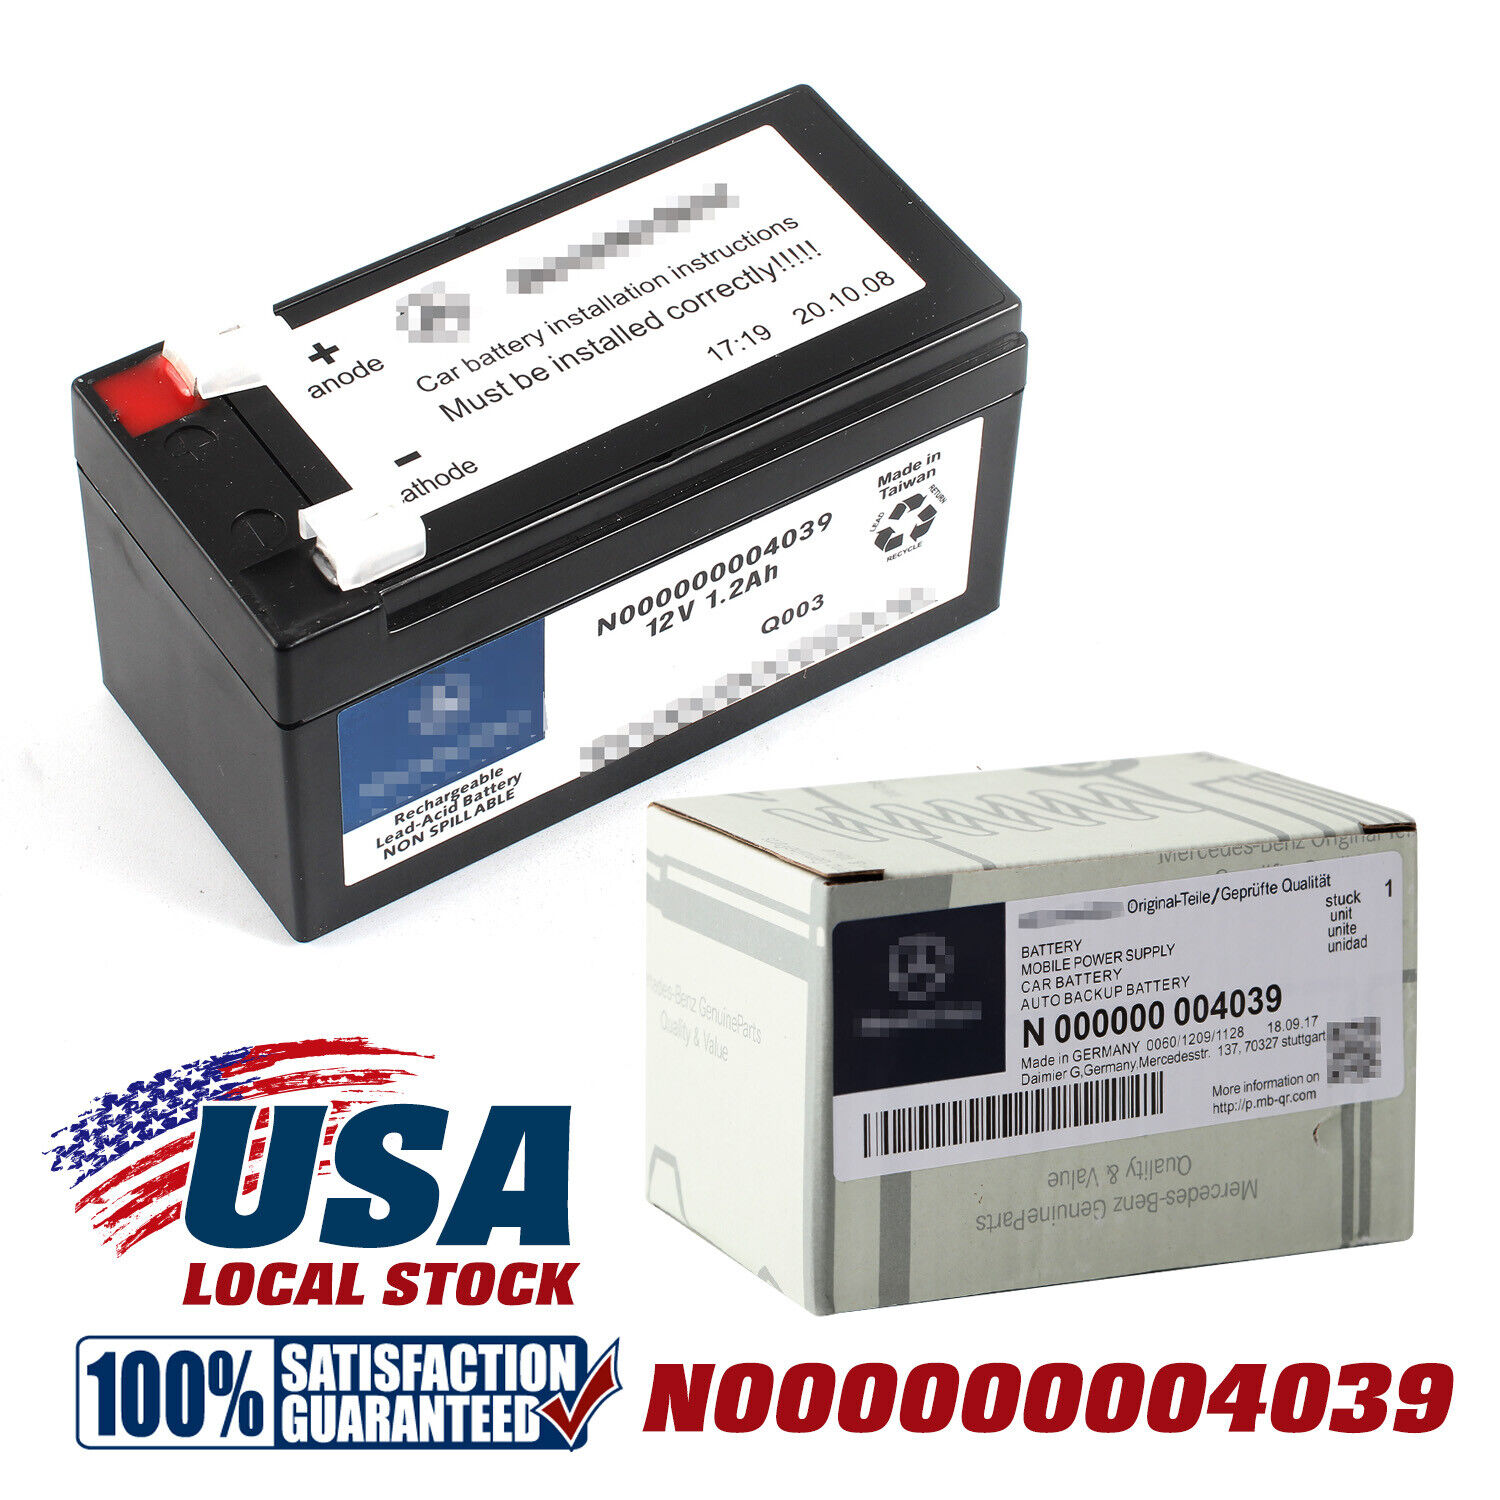 Genuine Auxiliary Battery 12V 1.2Ah For Mercedes-Benz W221 W212 N000000004039 US